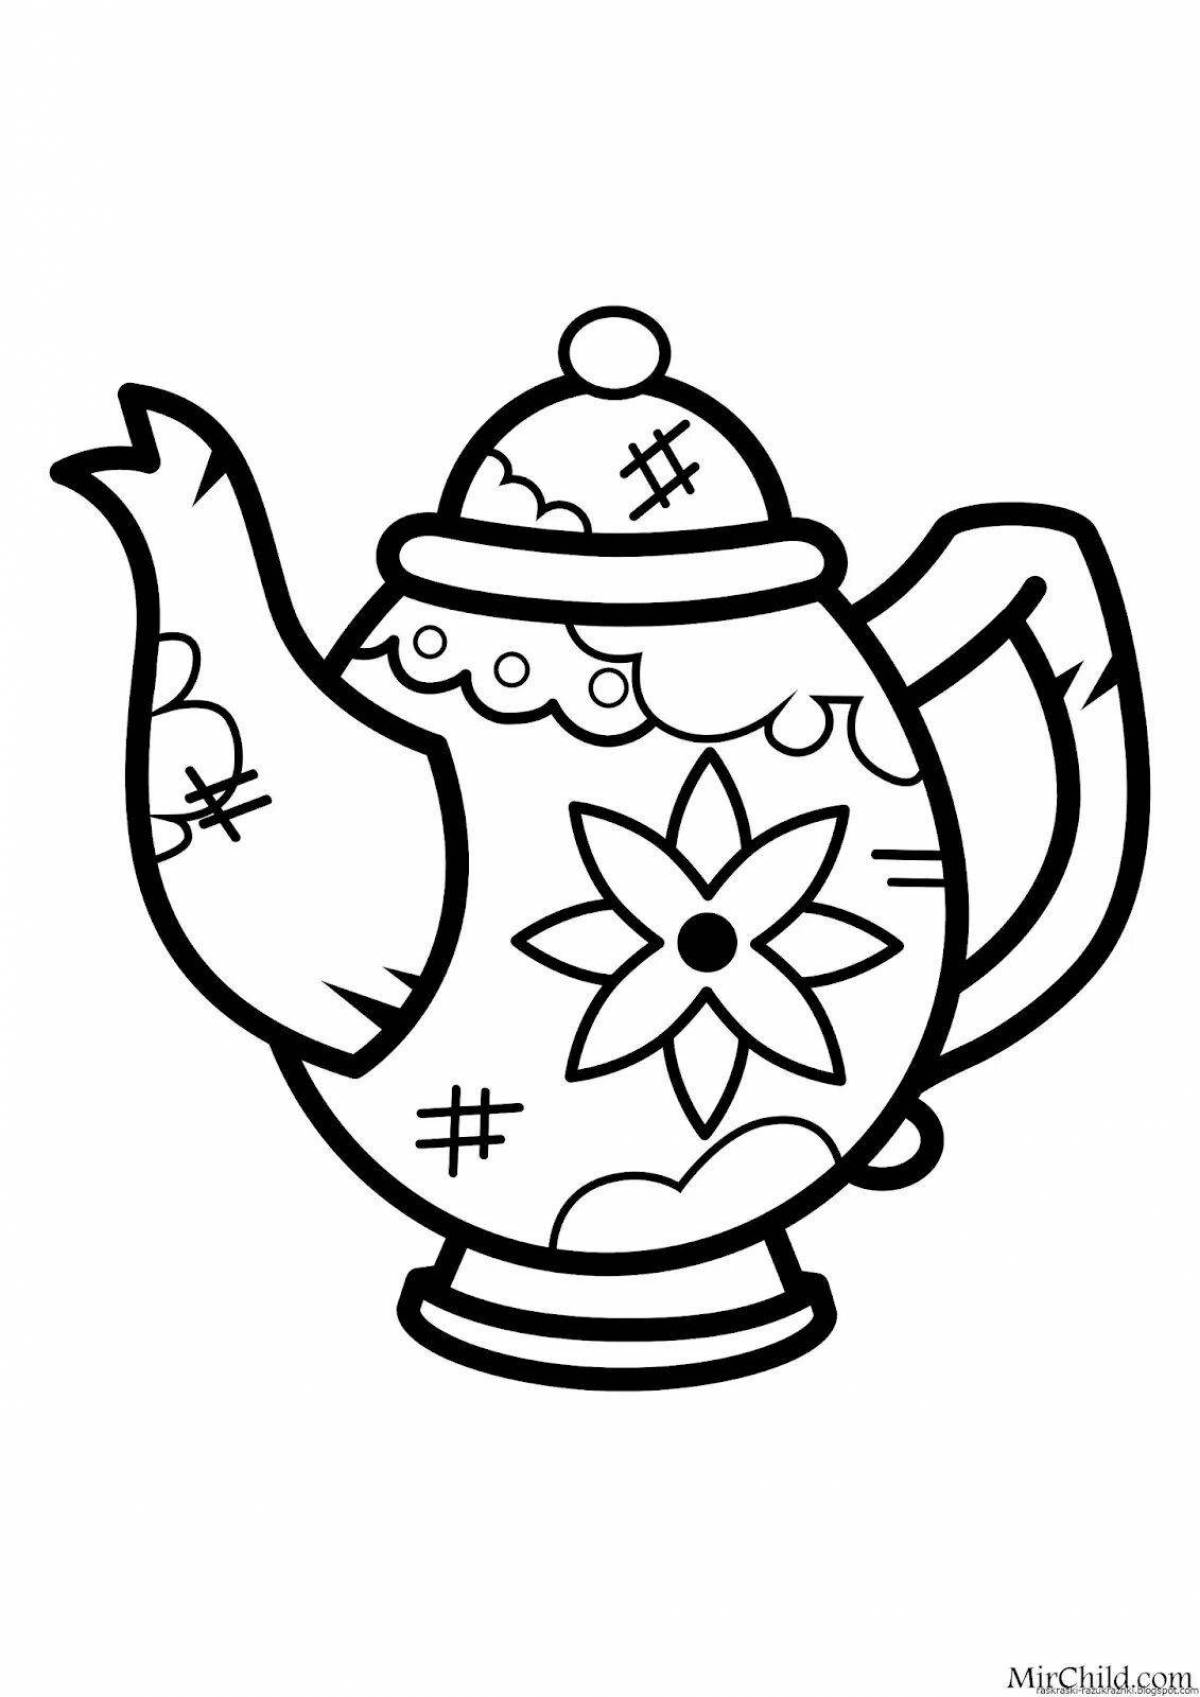 Fairy teapot coloring book for kids